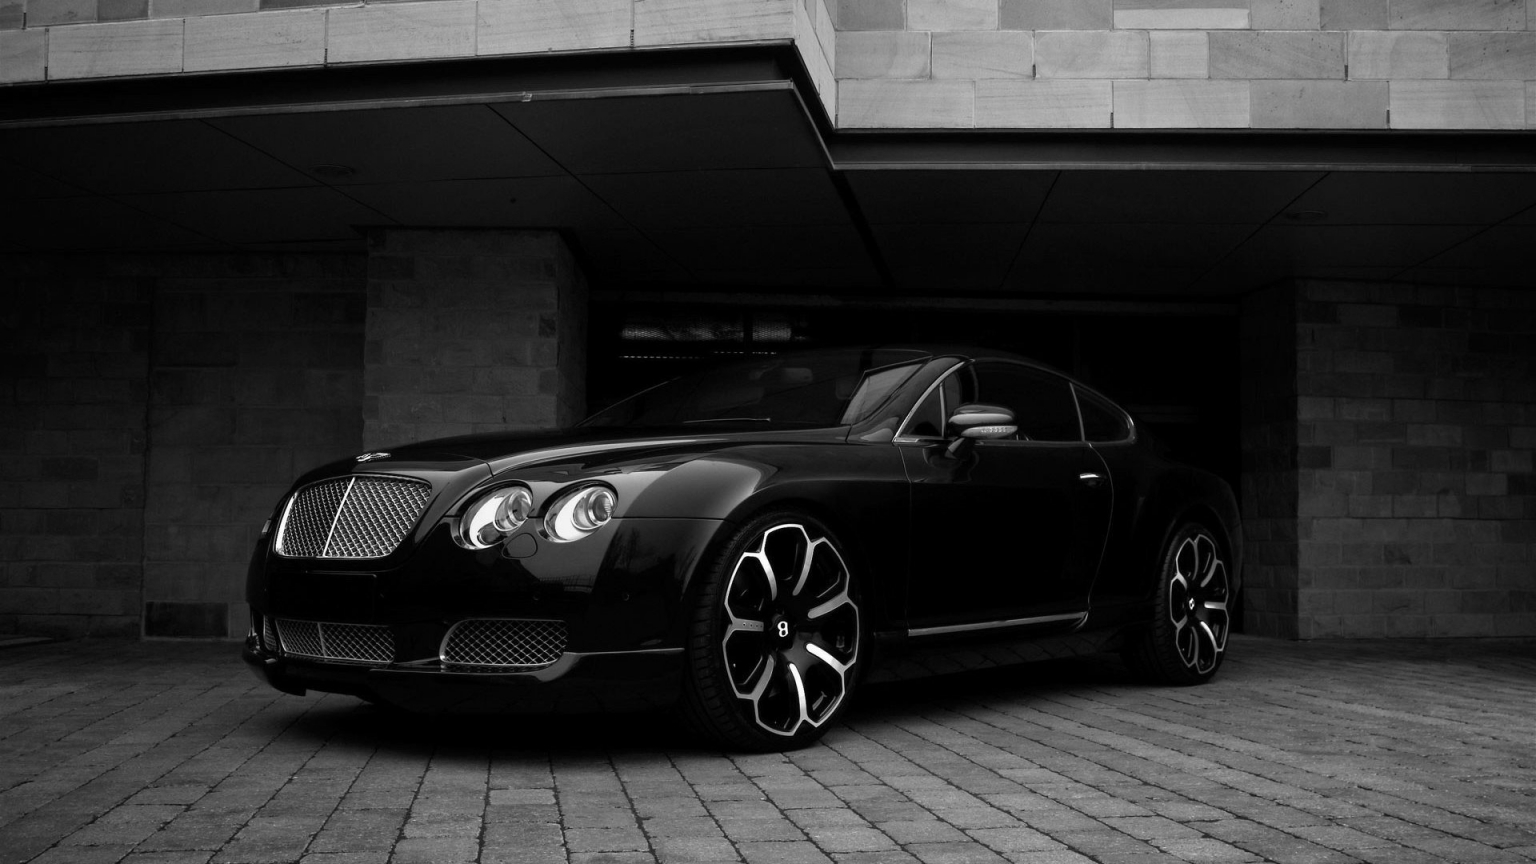 Black Bentley Front Angle for 1536 x 864 HDTV resolution